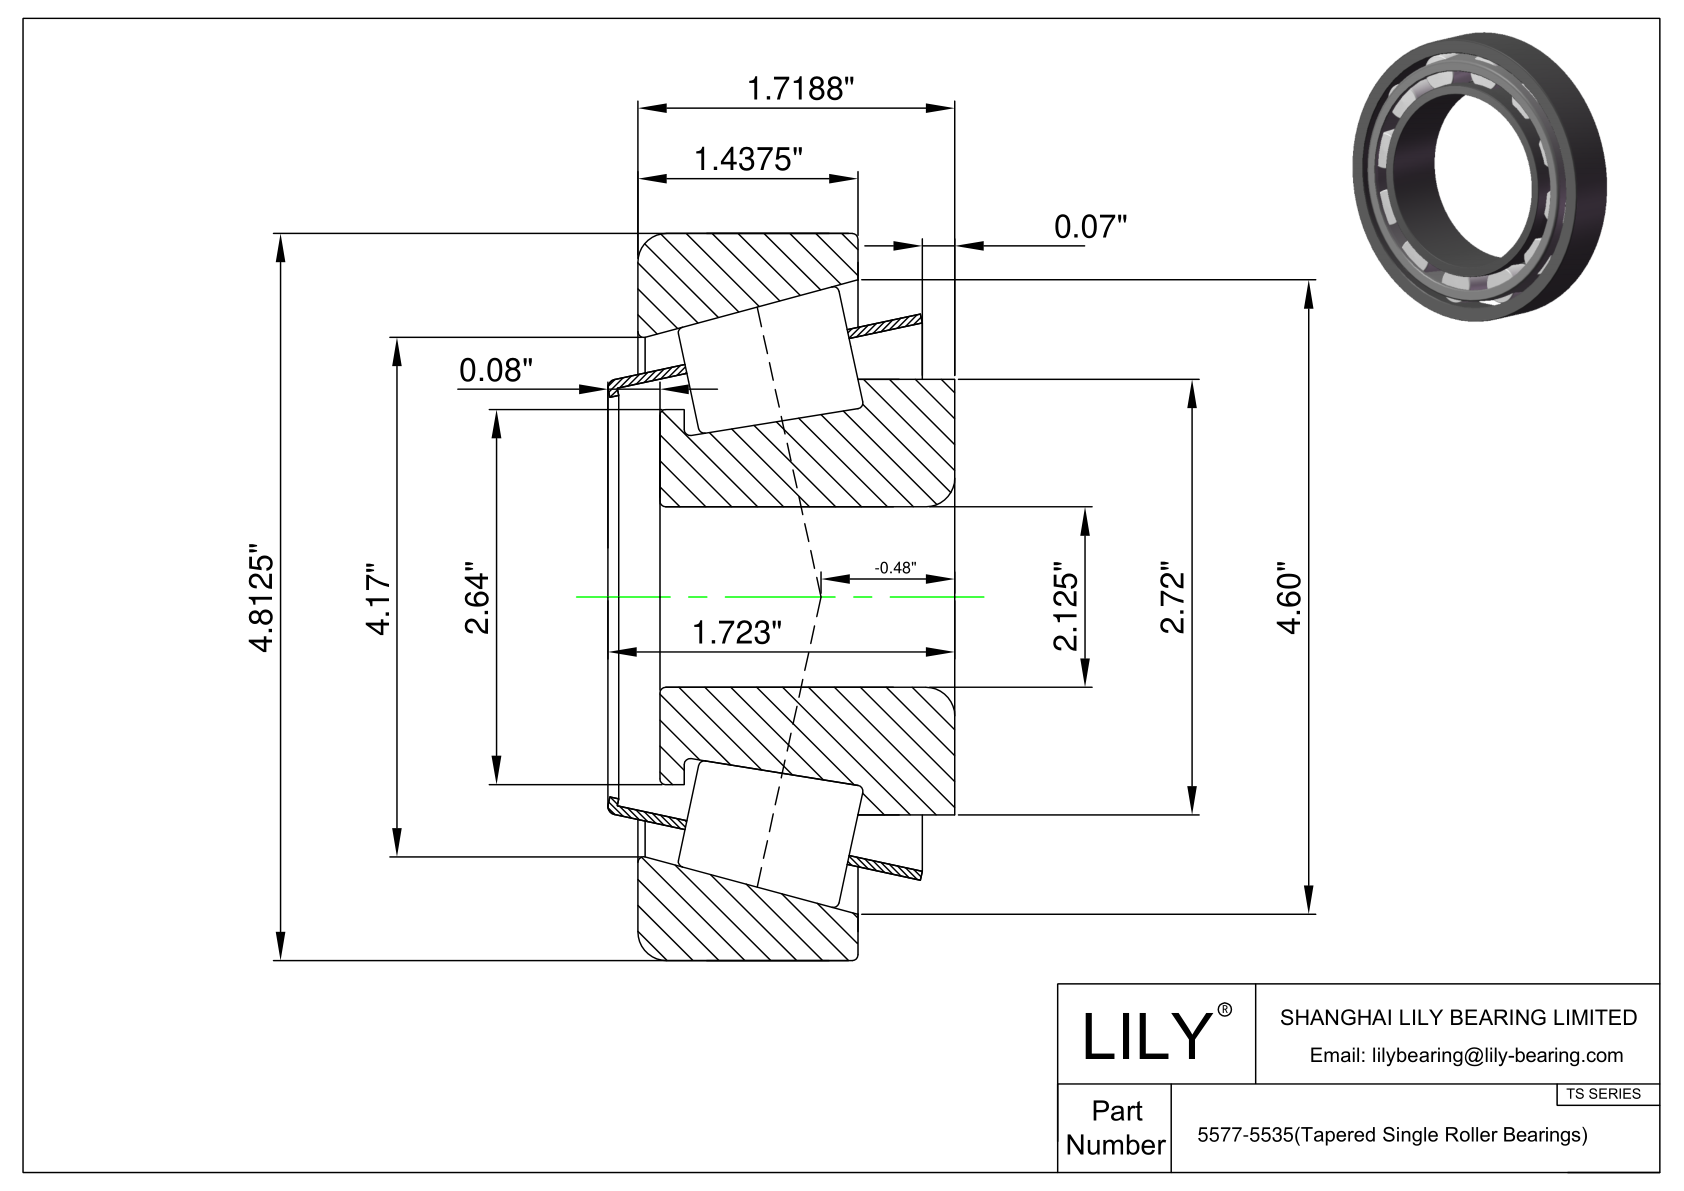 5577-5535 TS (Tapered Single Roller Bearings) (Imperial) cad drawing